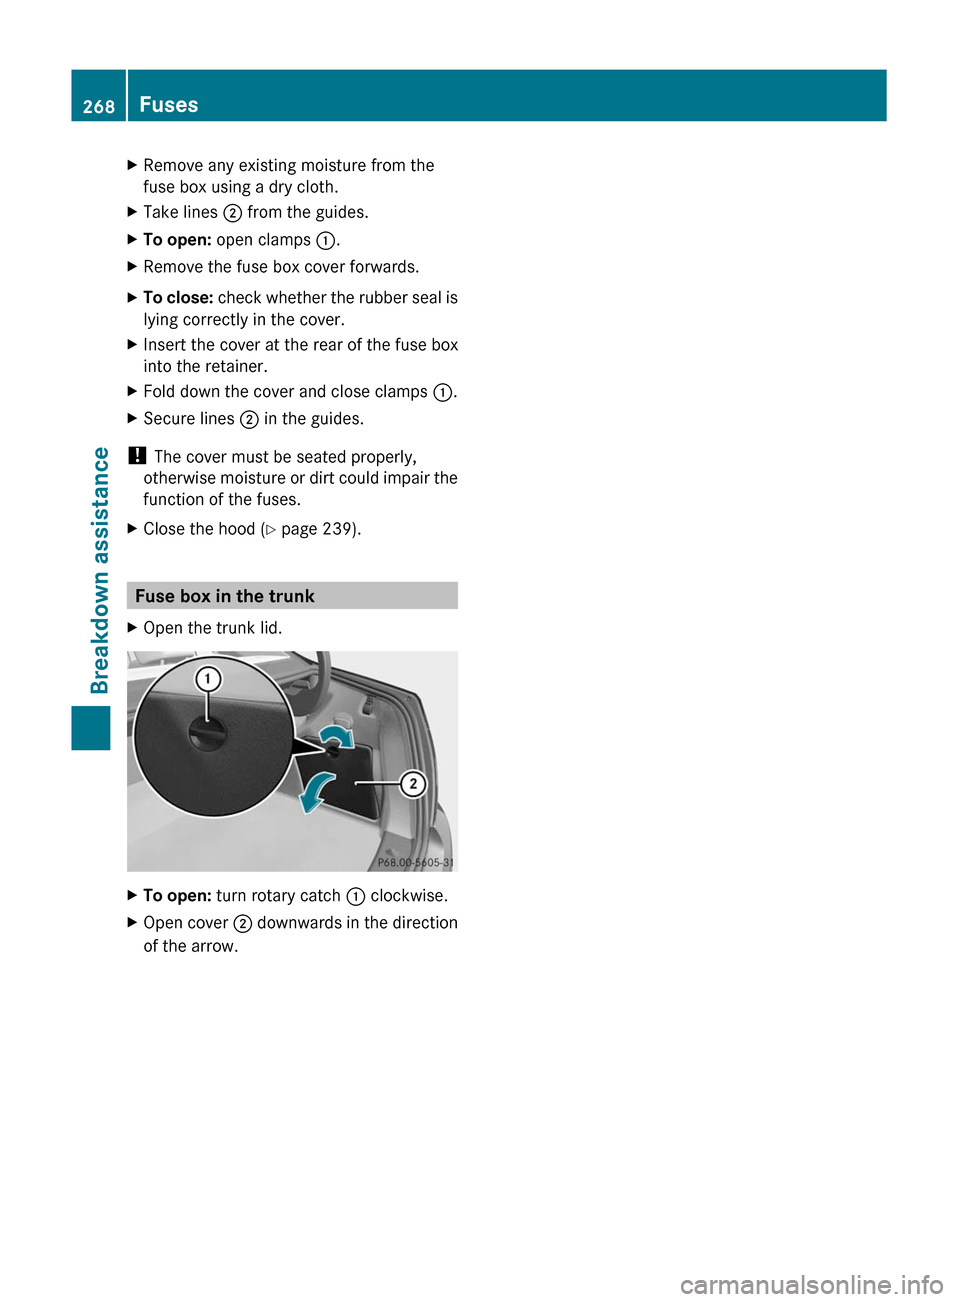 MERCEDES-BENZ C-Class 2011 W204 Manual PDF XRemove any existing moisture from the
fuse box using a dry cloth.
XTake lines ; from the guides.XTo open: open clamps :.XRemove the fuse box cover forwards.XTo close: check whether the rubber seal is